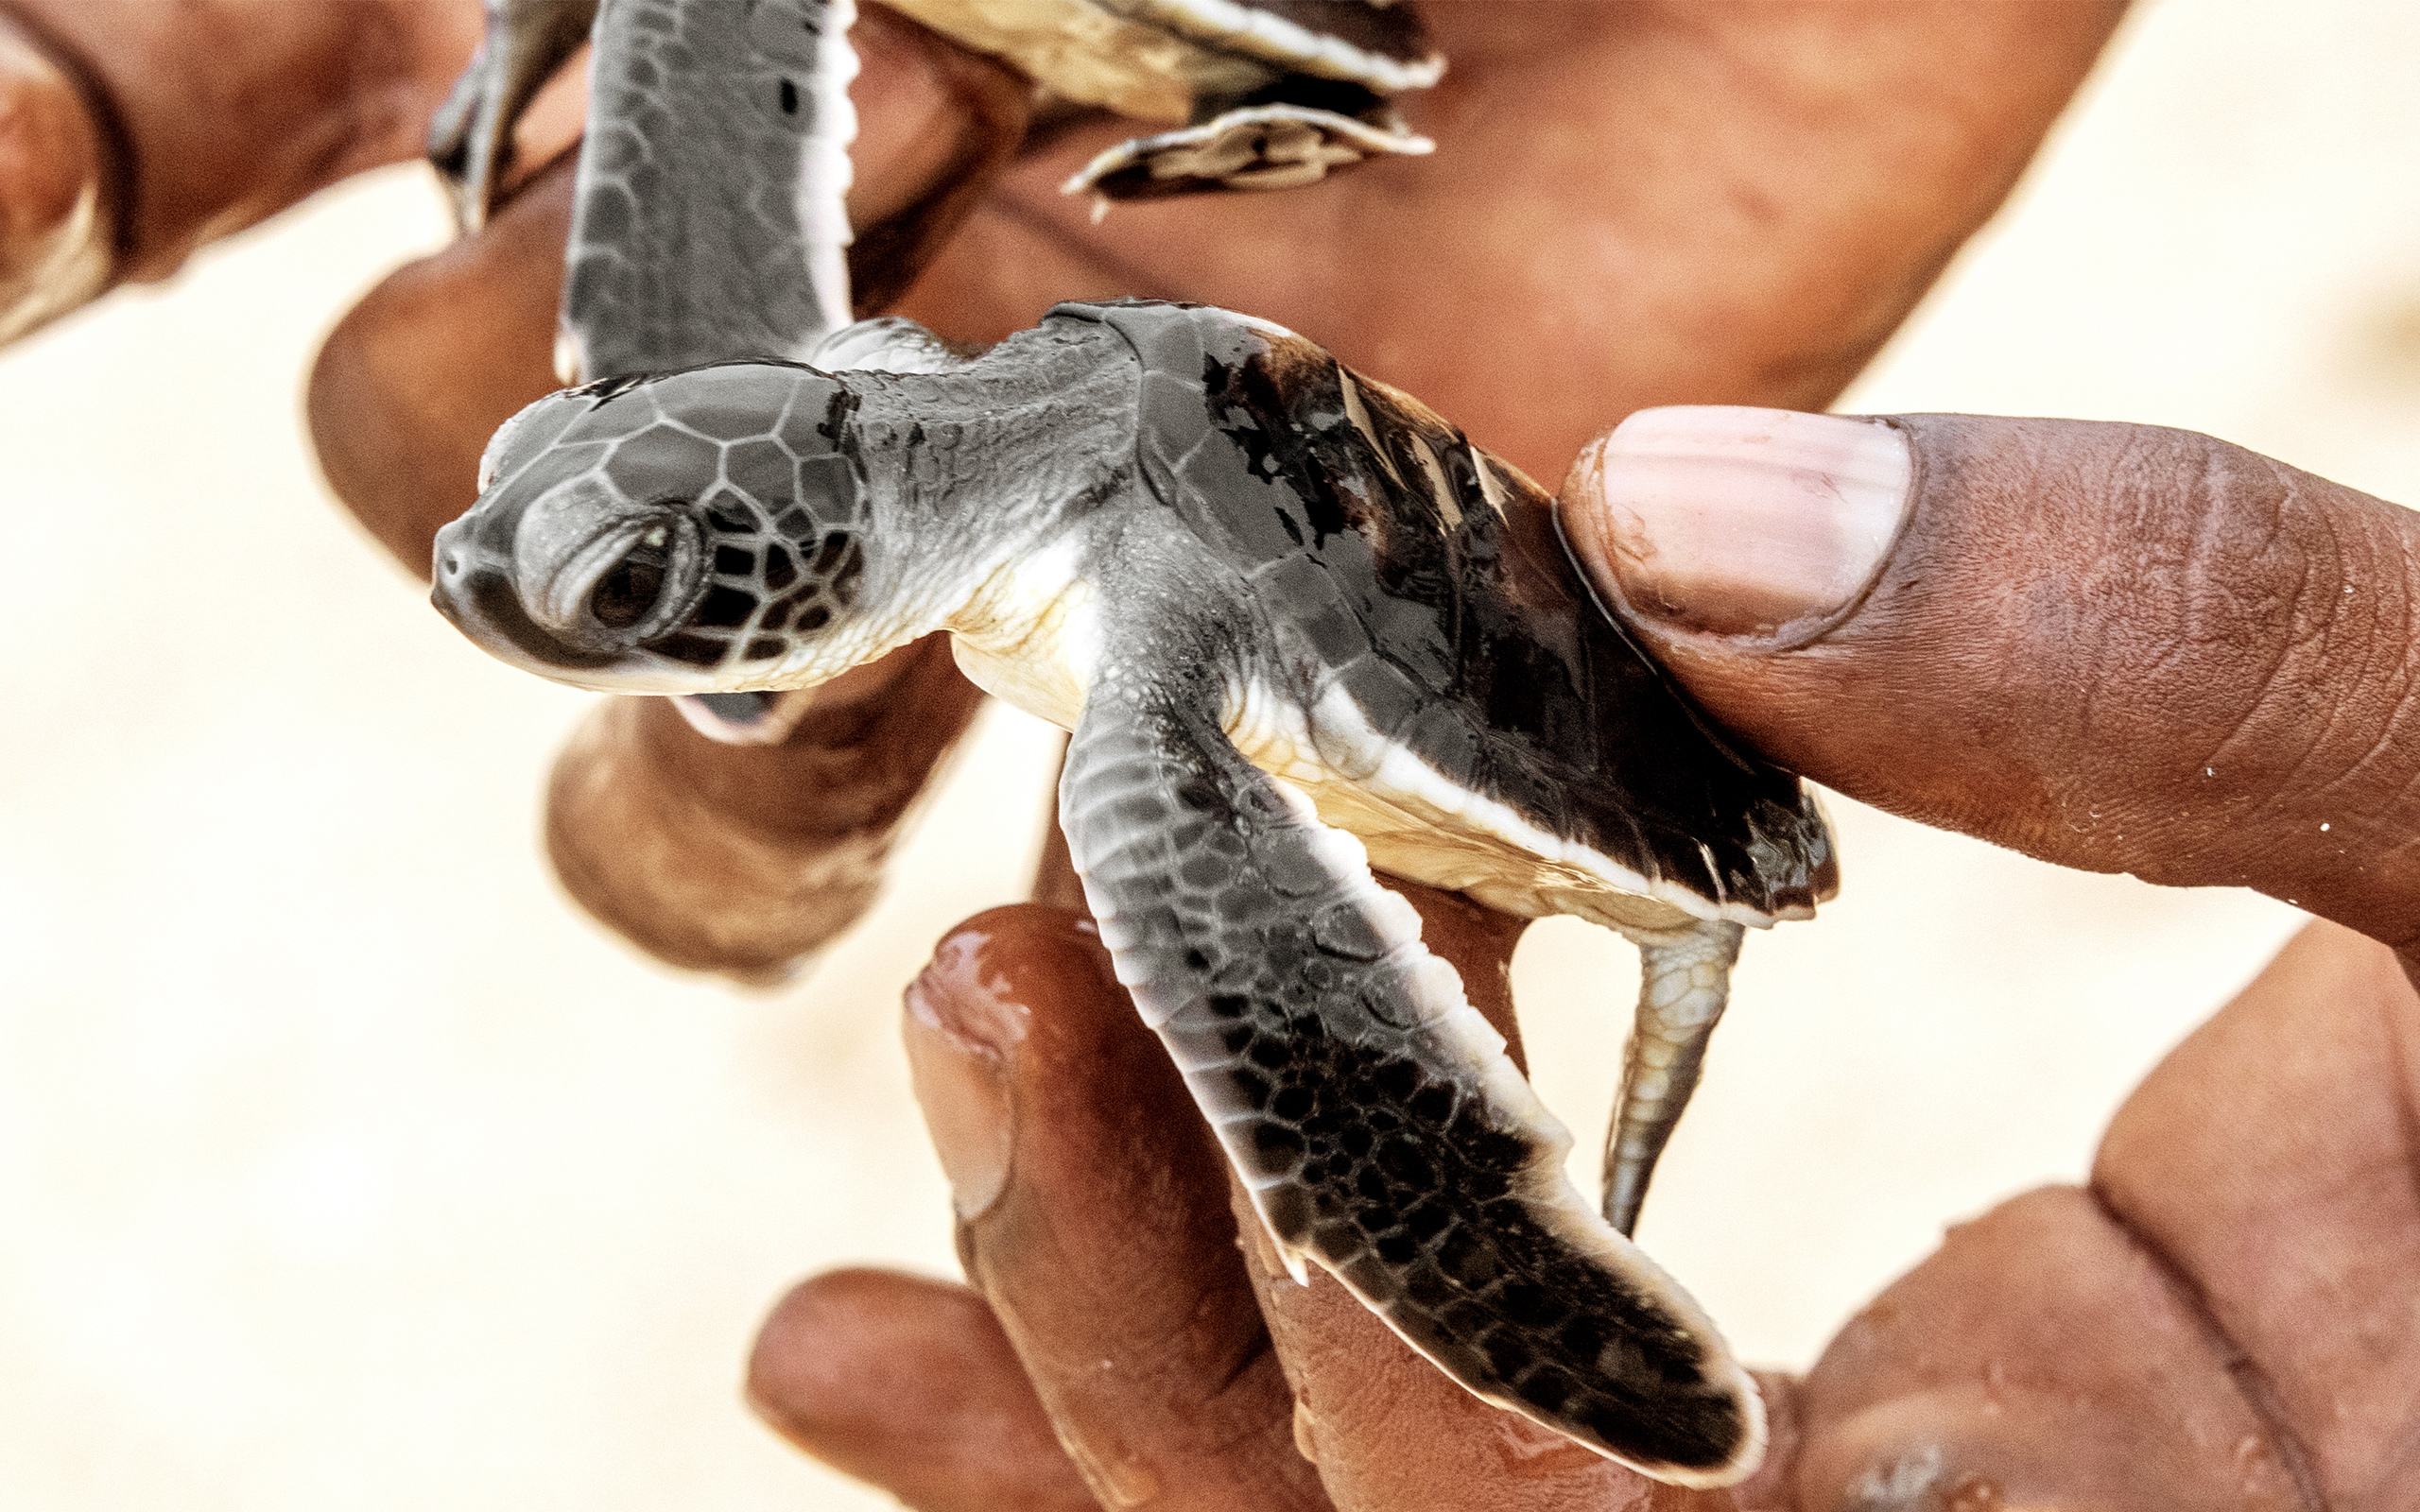 Hands hold a baby sea turtle